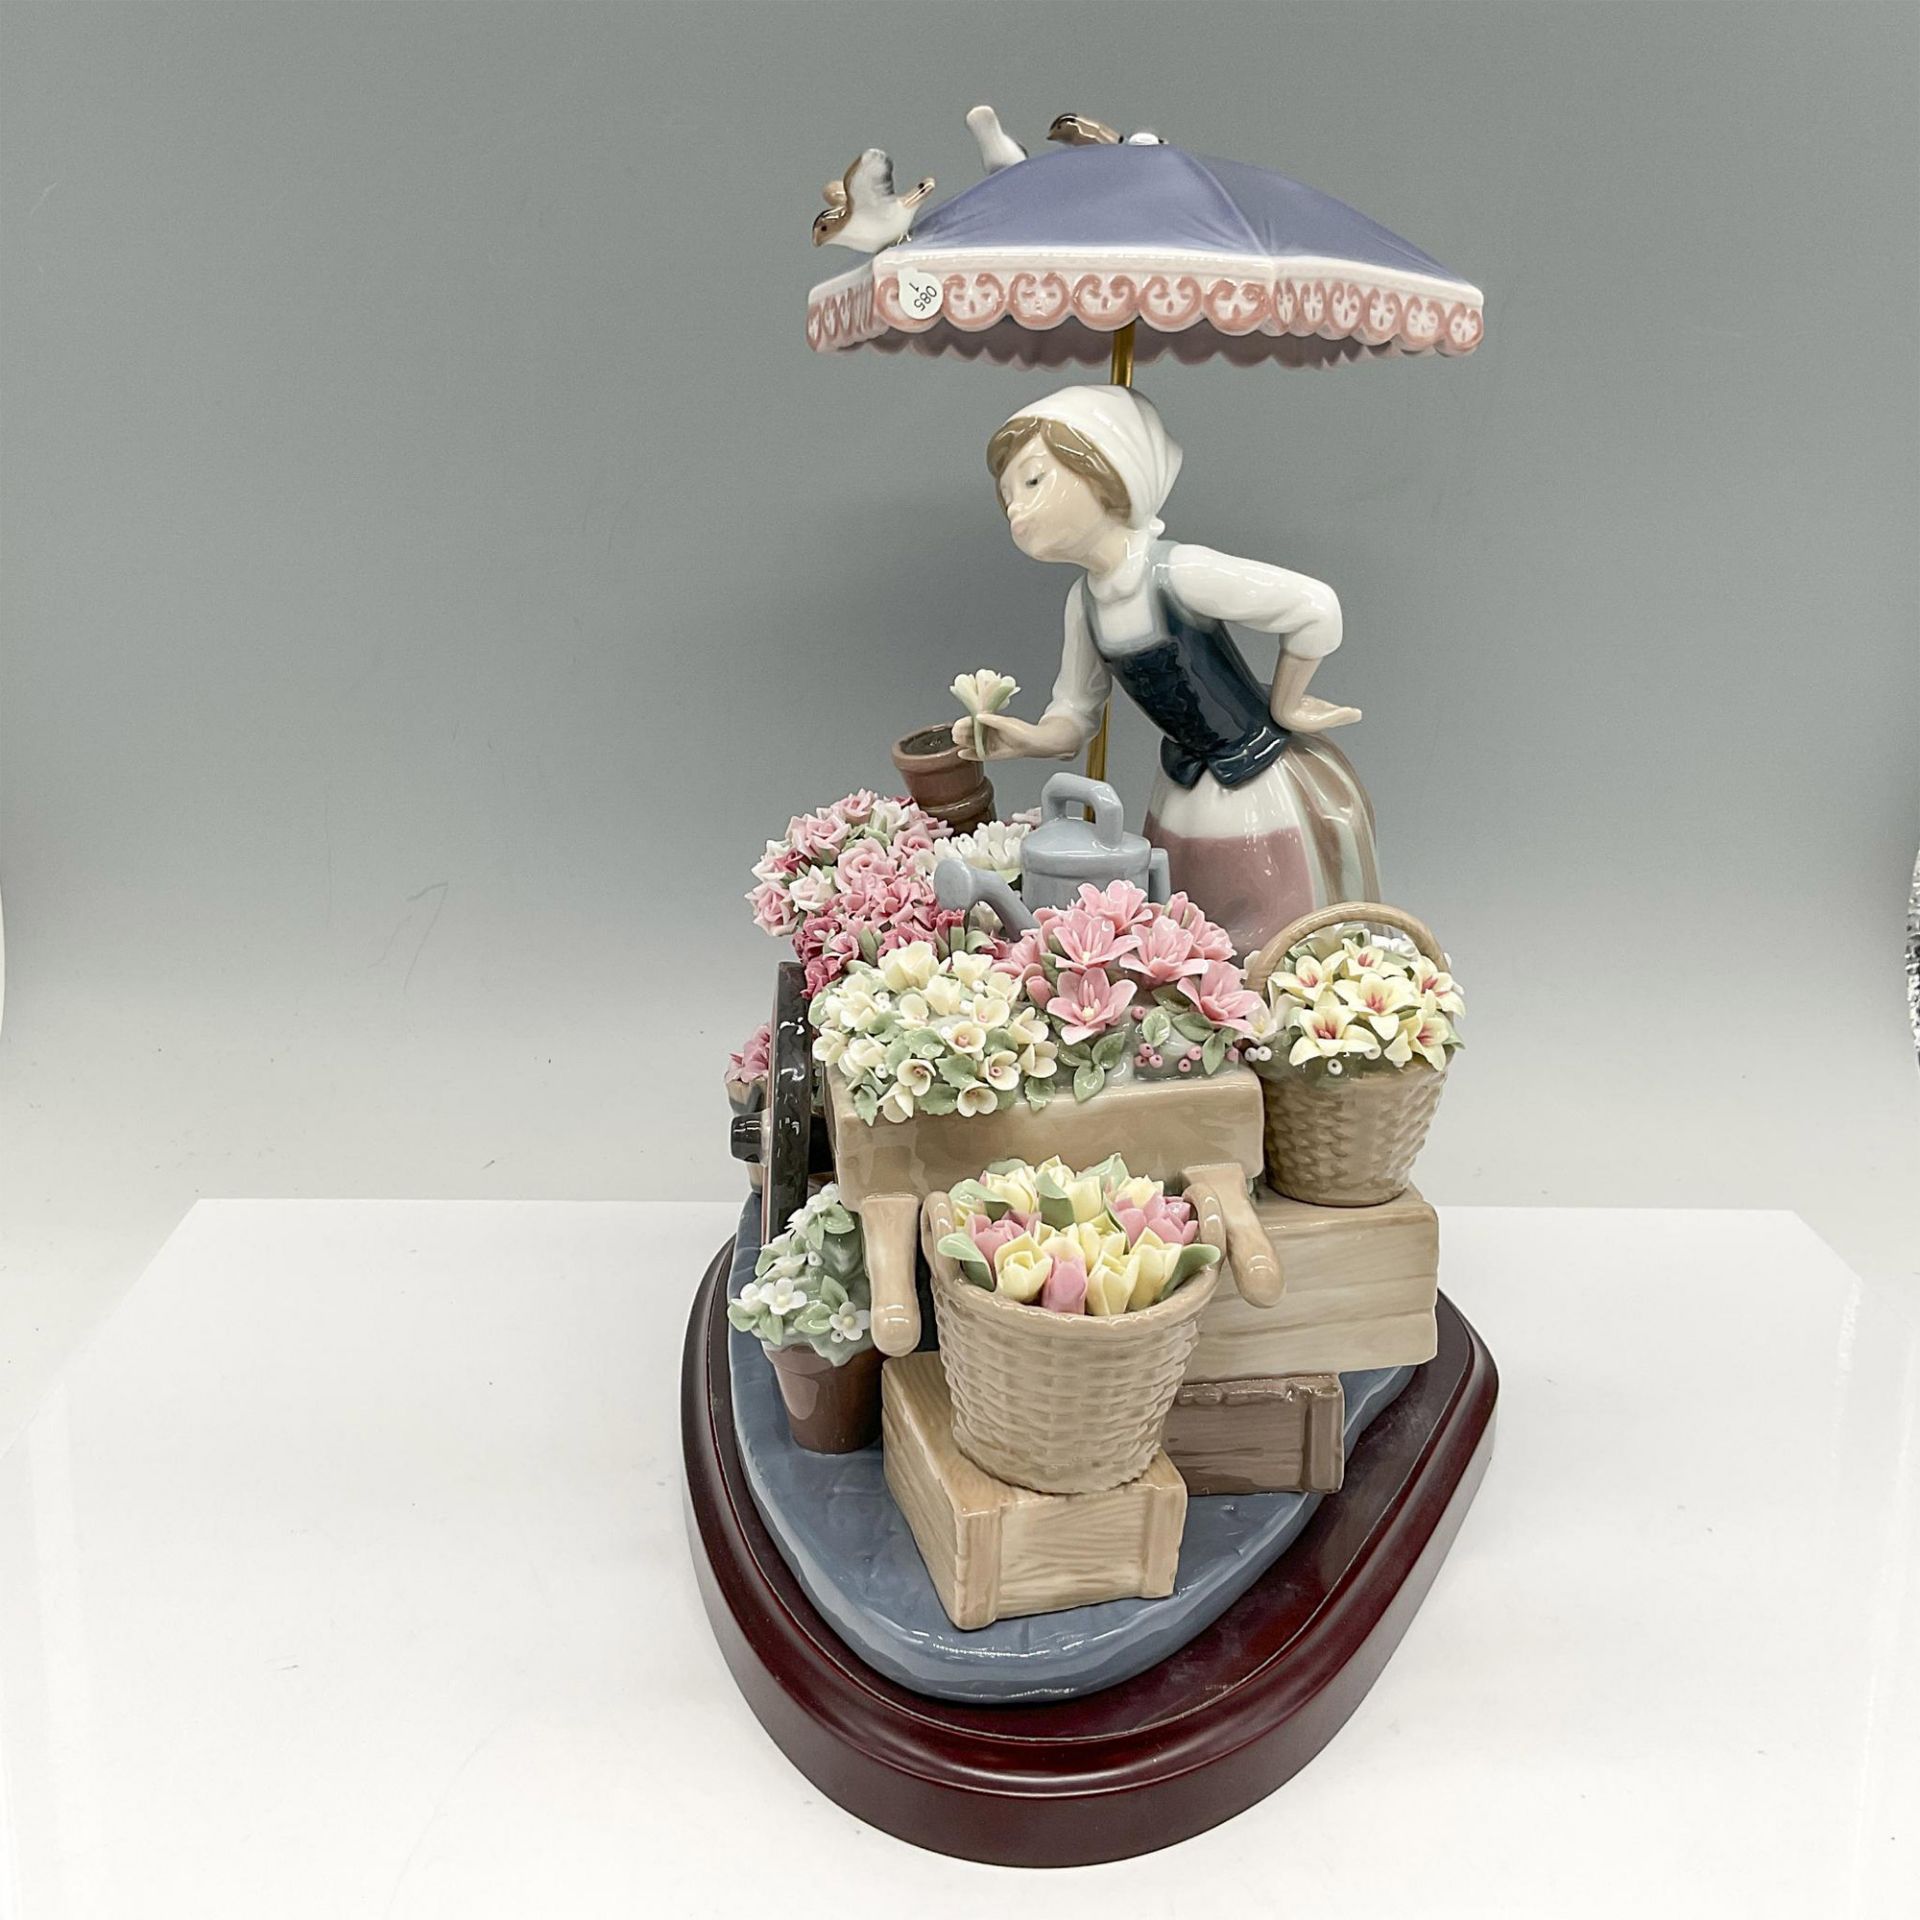 Flowers of the Season 1001454 - Lladro Porcelain Figurine with Base - Image 2 of 4